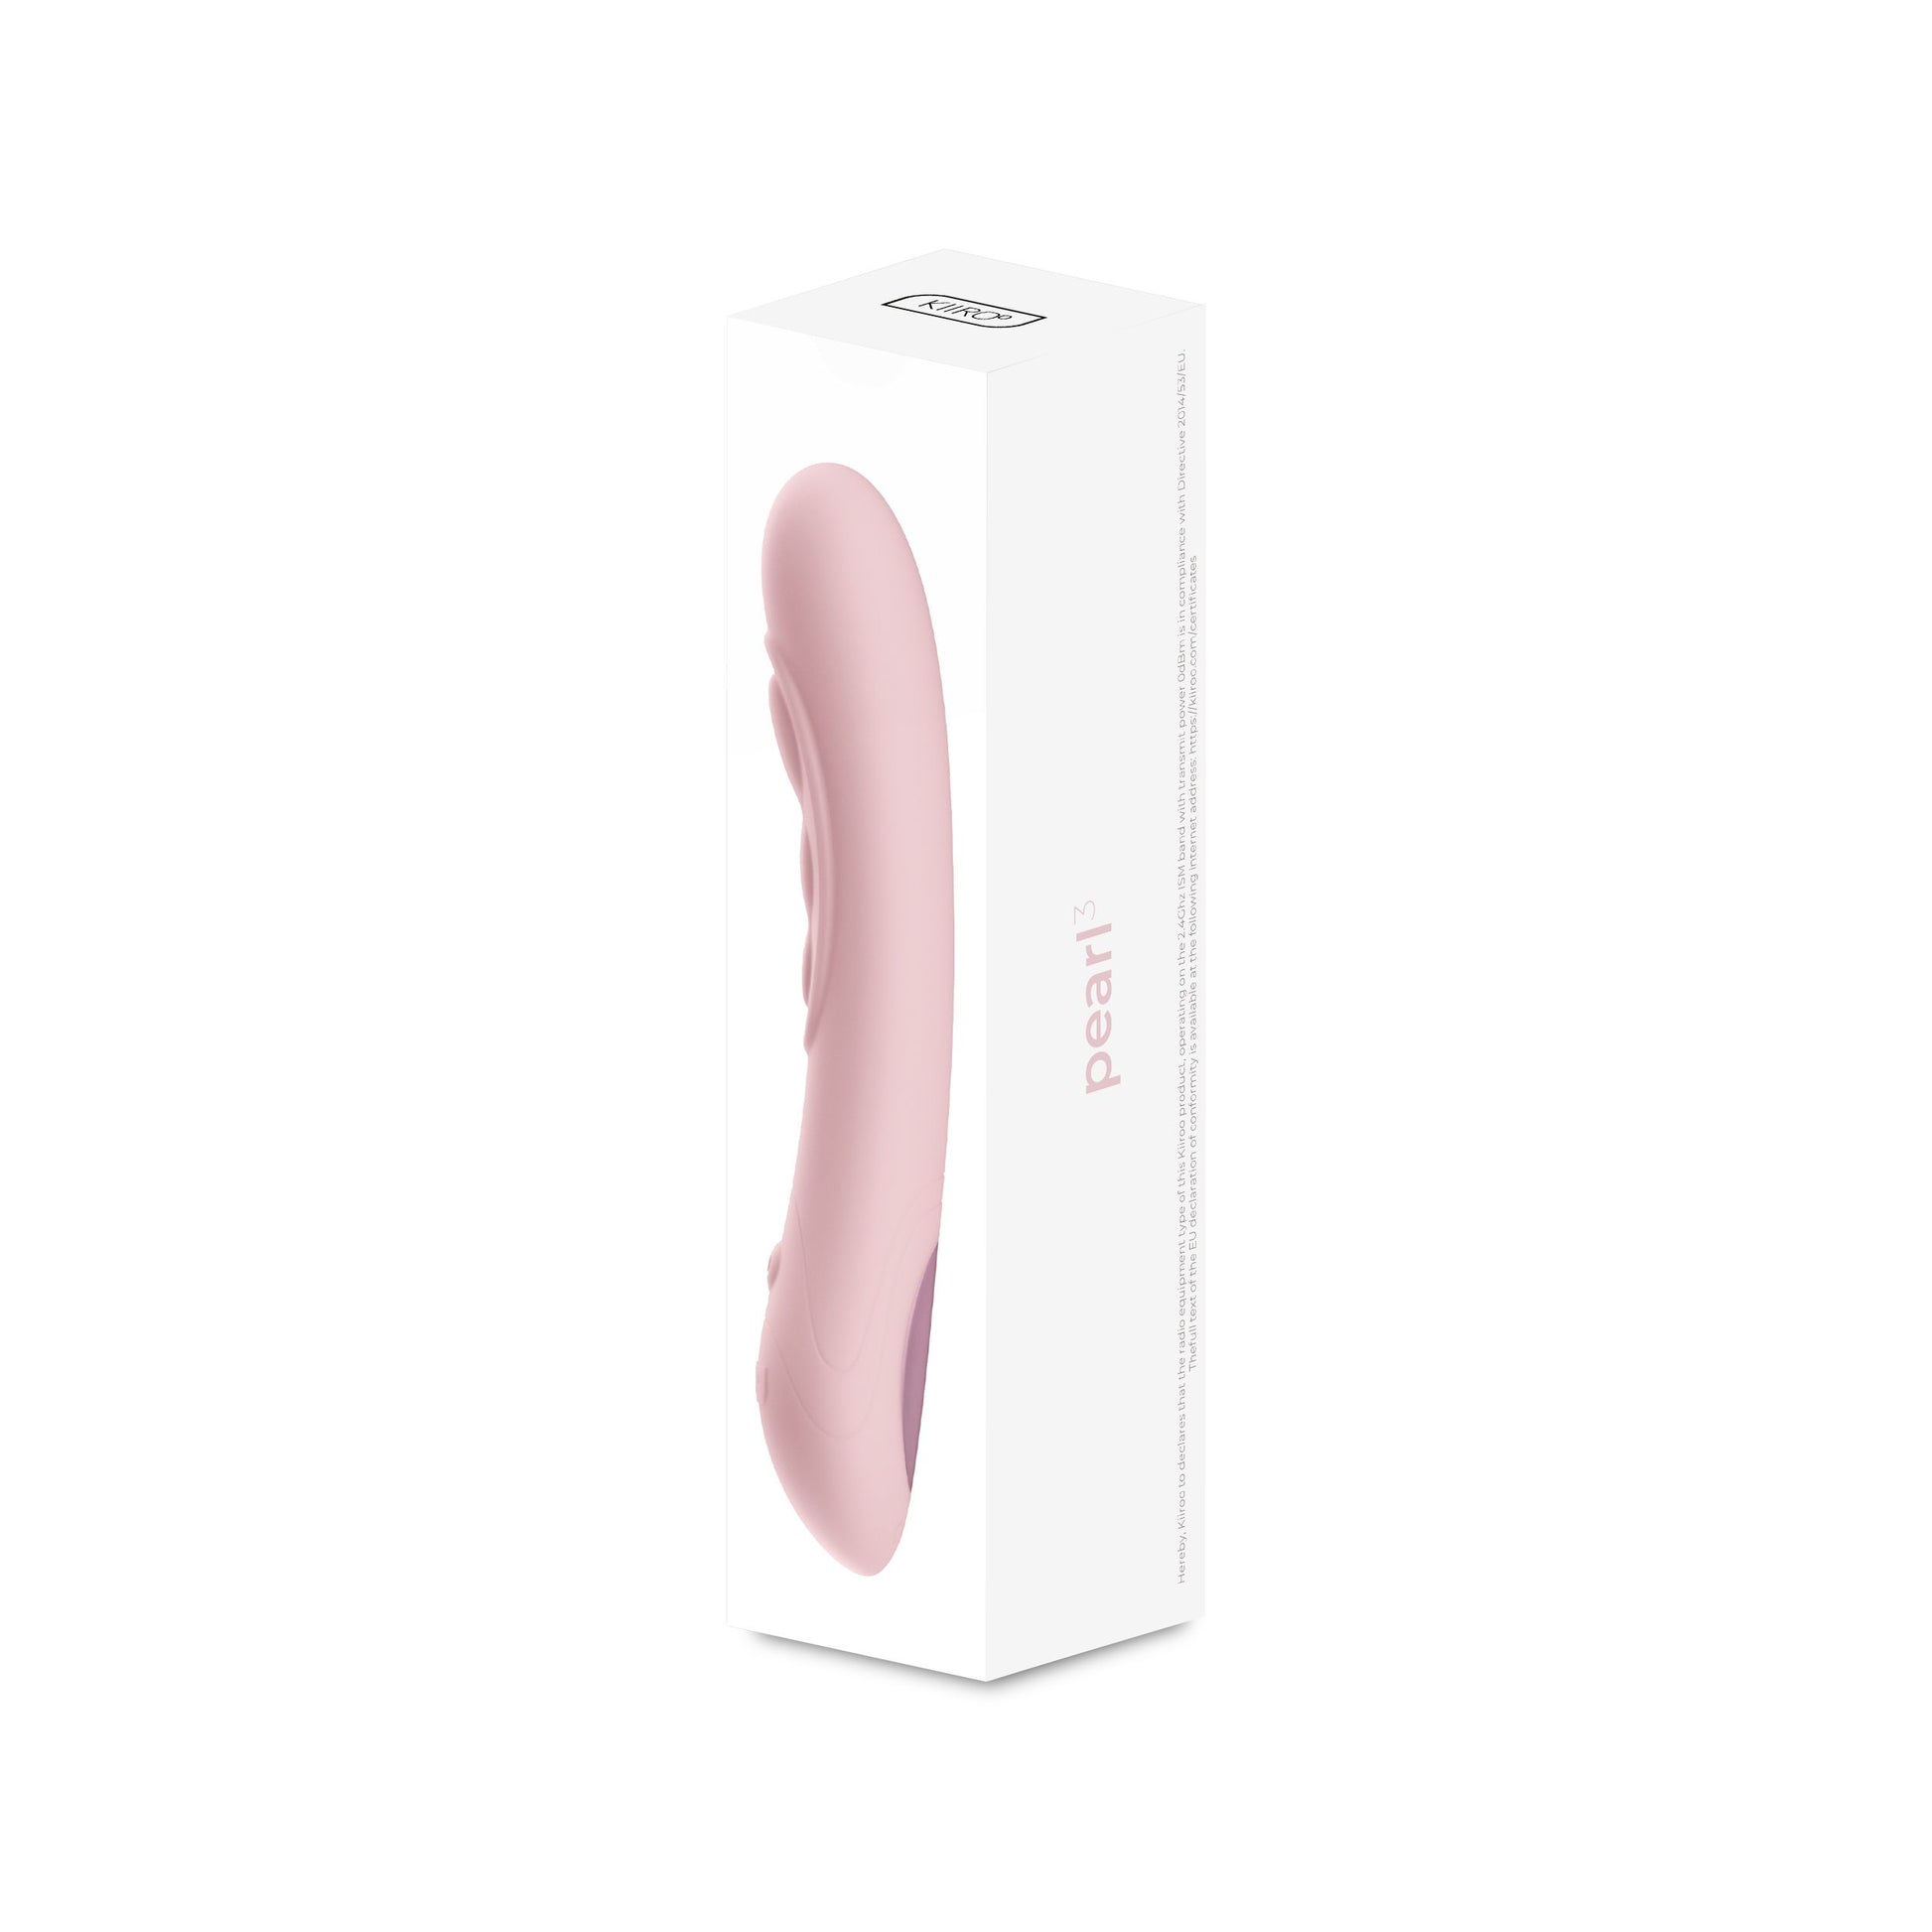 The packaging for the pink Kiiroo Pearl3 G-Spot Vibrator.